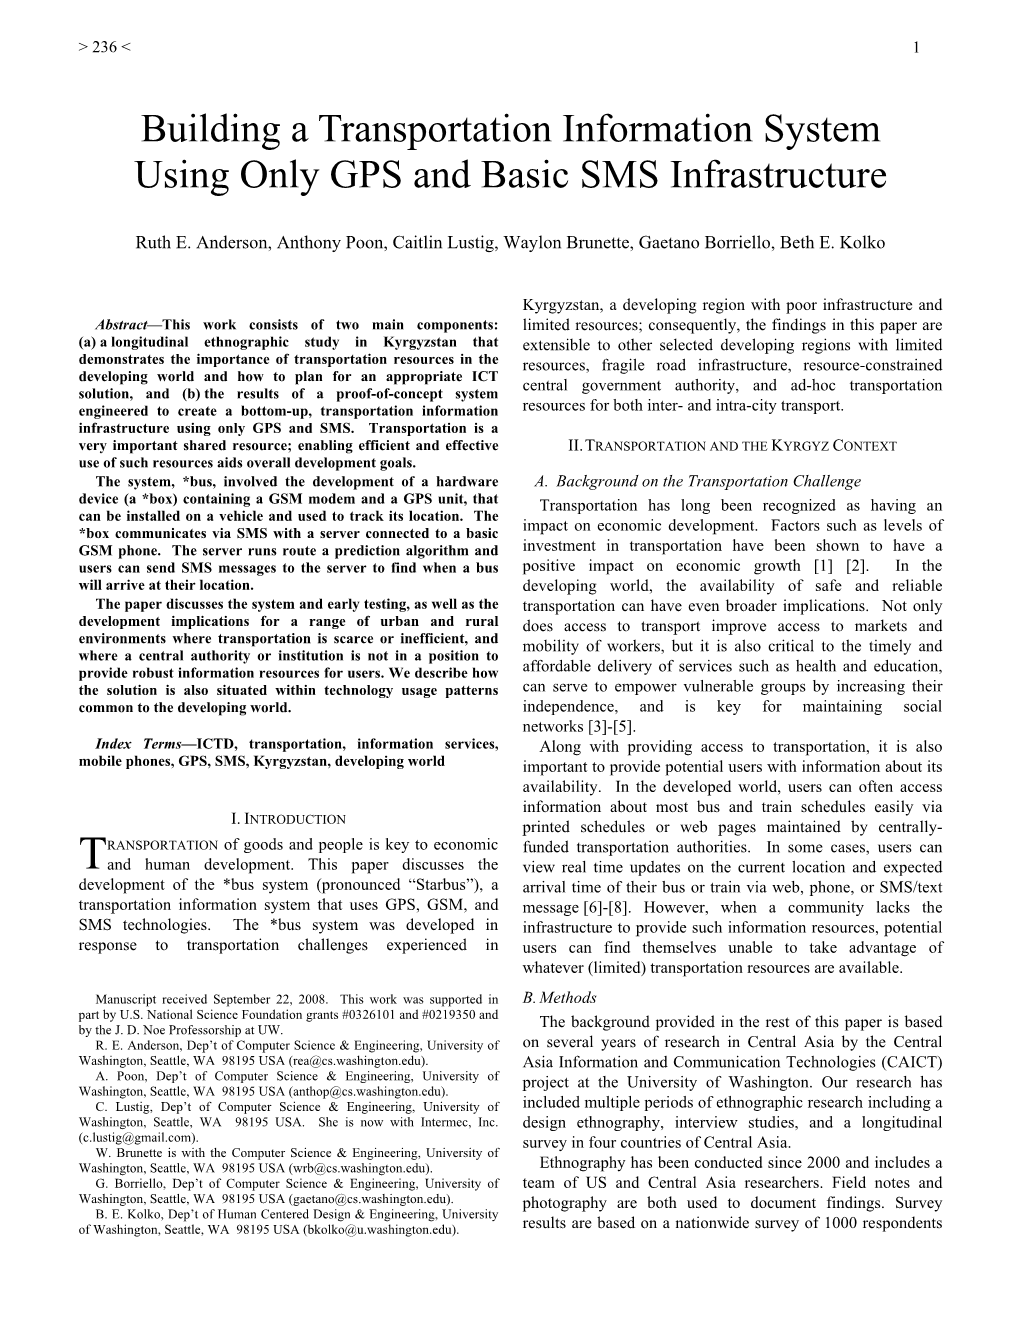 Building a Transportation Information System Using Only GPS and Basic SMS Infrastructure